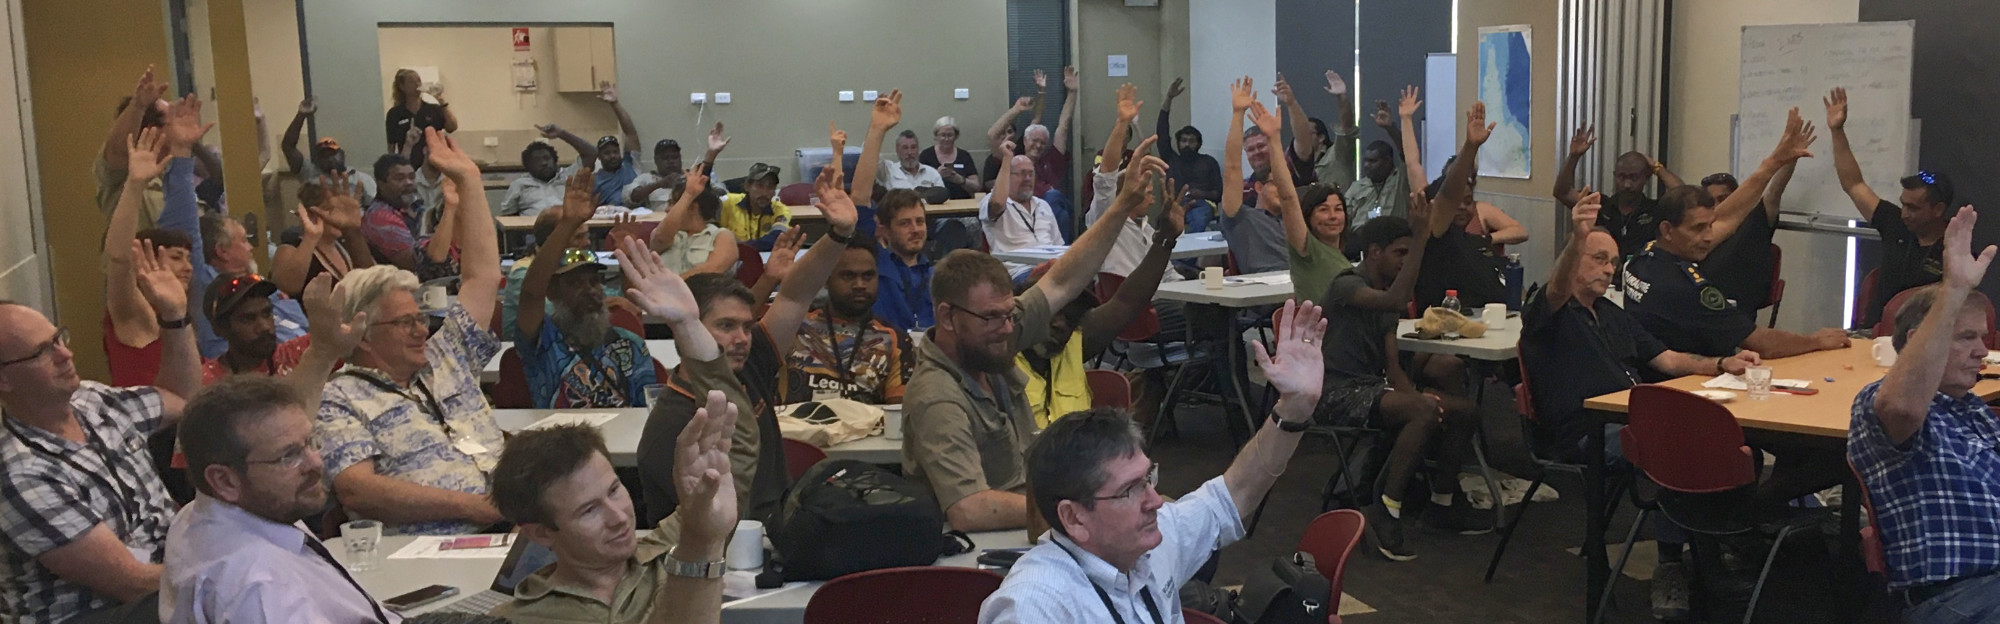 People raising hands at a meeting